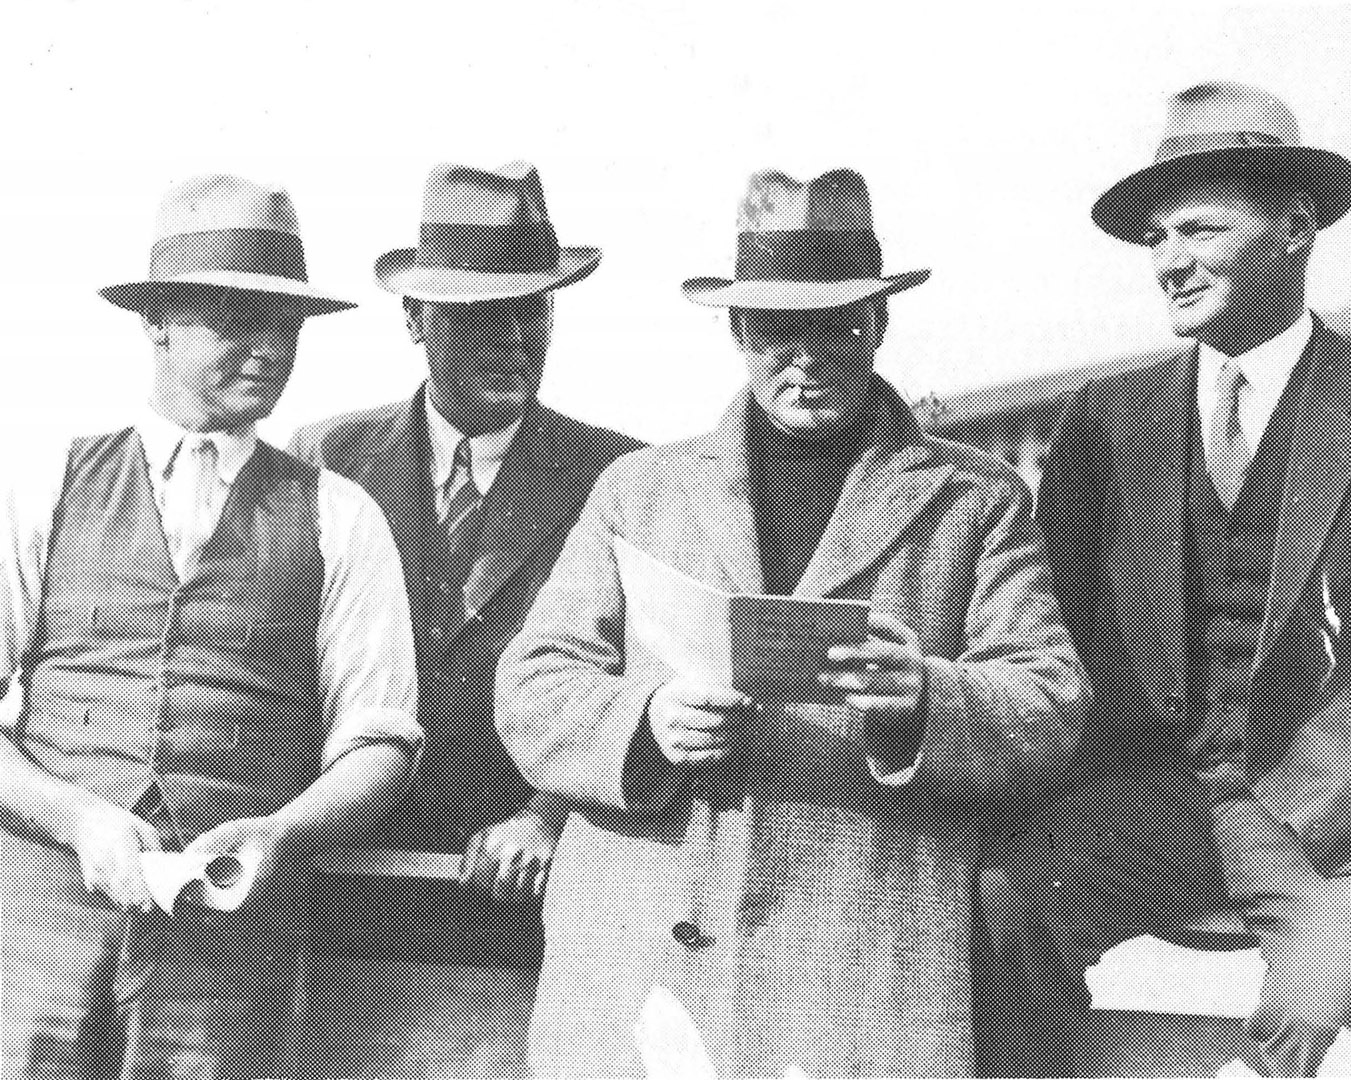 The Hinton brothers at the Frankton stock sale. L to R: Carl, Dick, George and Ross